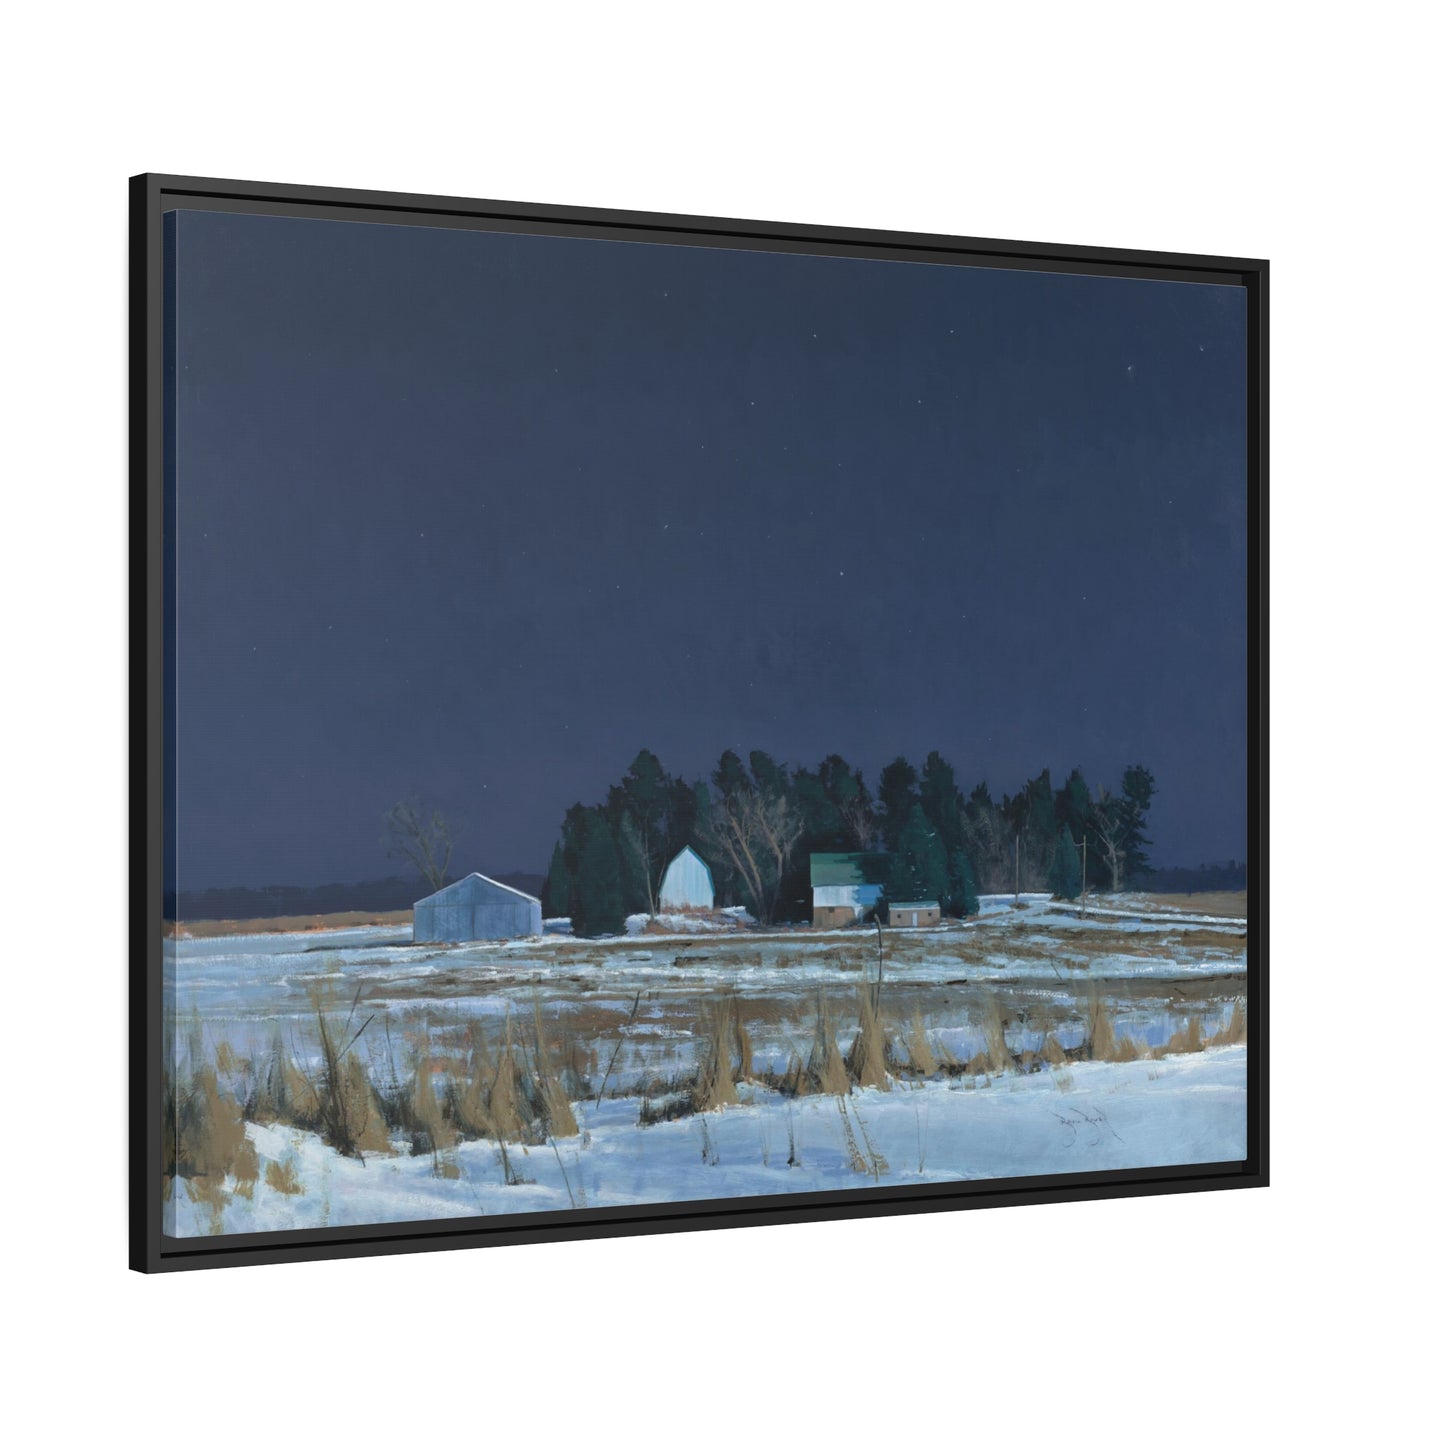 Ben Bauer: "Midnight at 20 Below" - Framed Canvas Reproduction